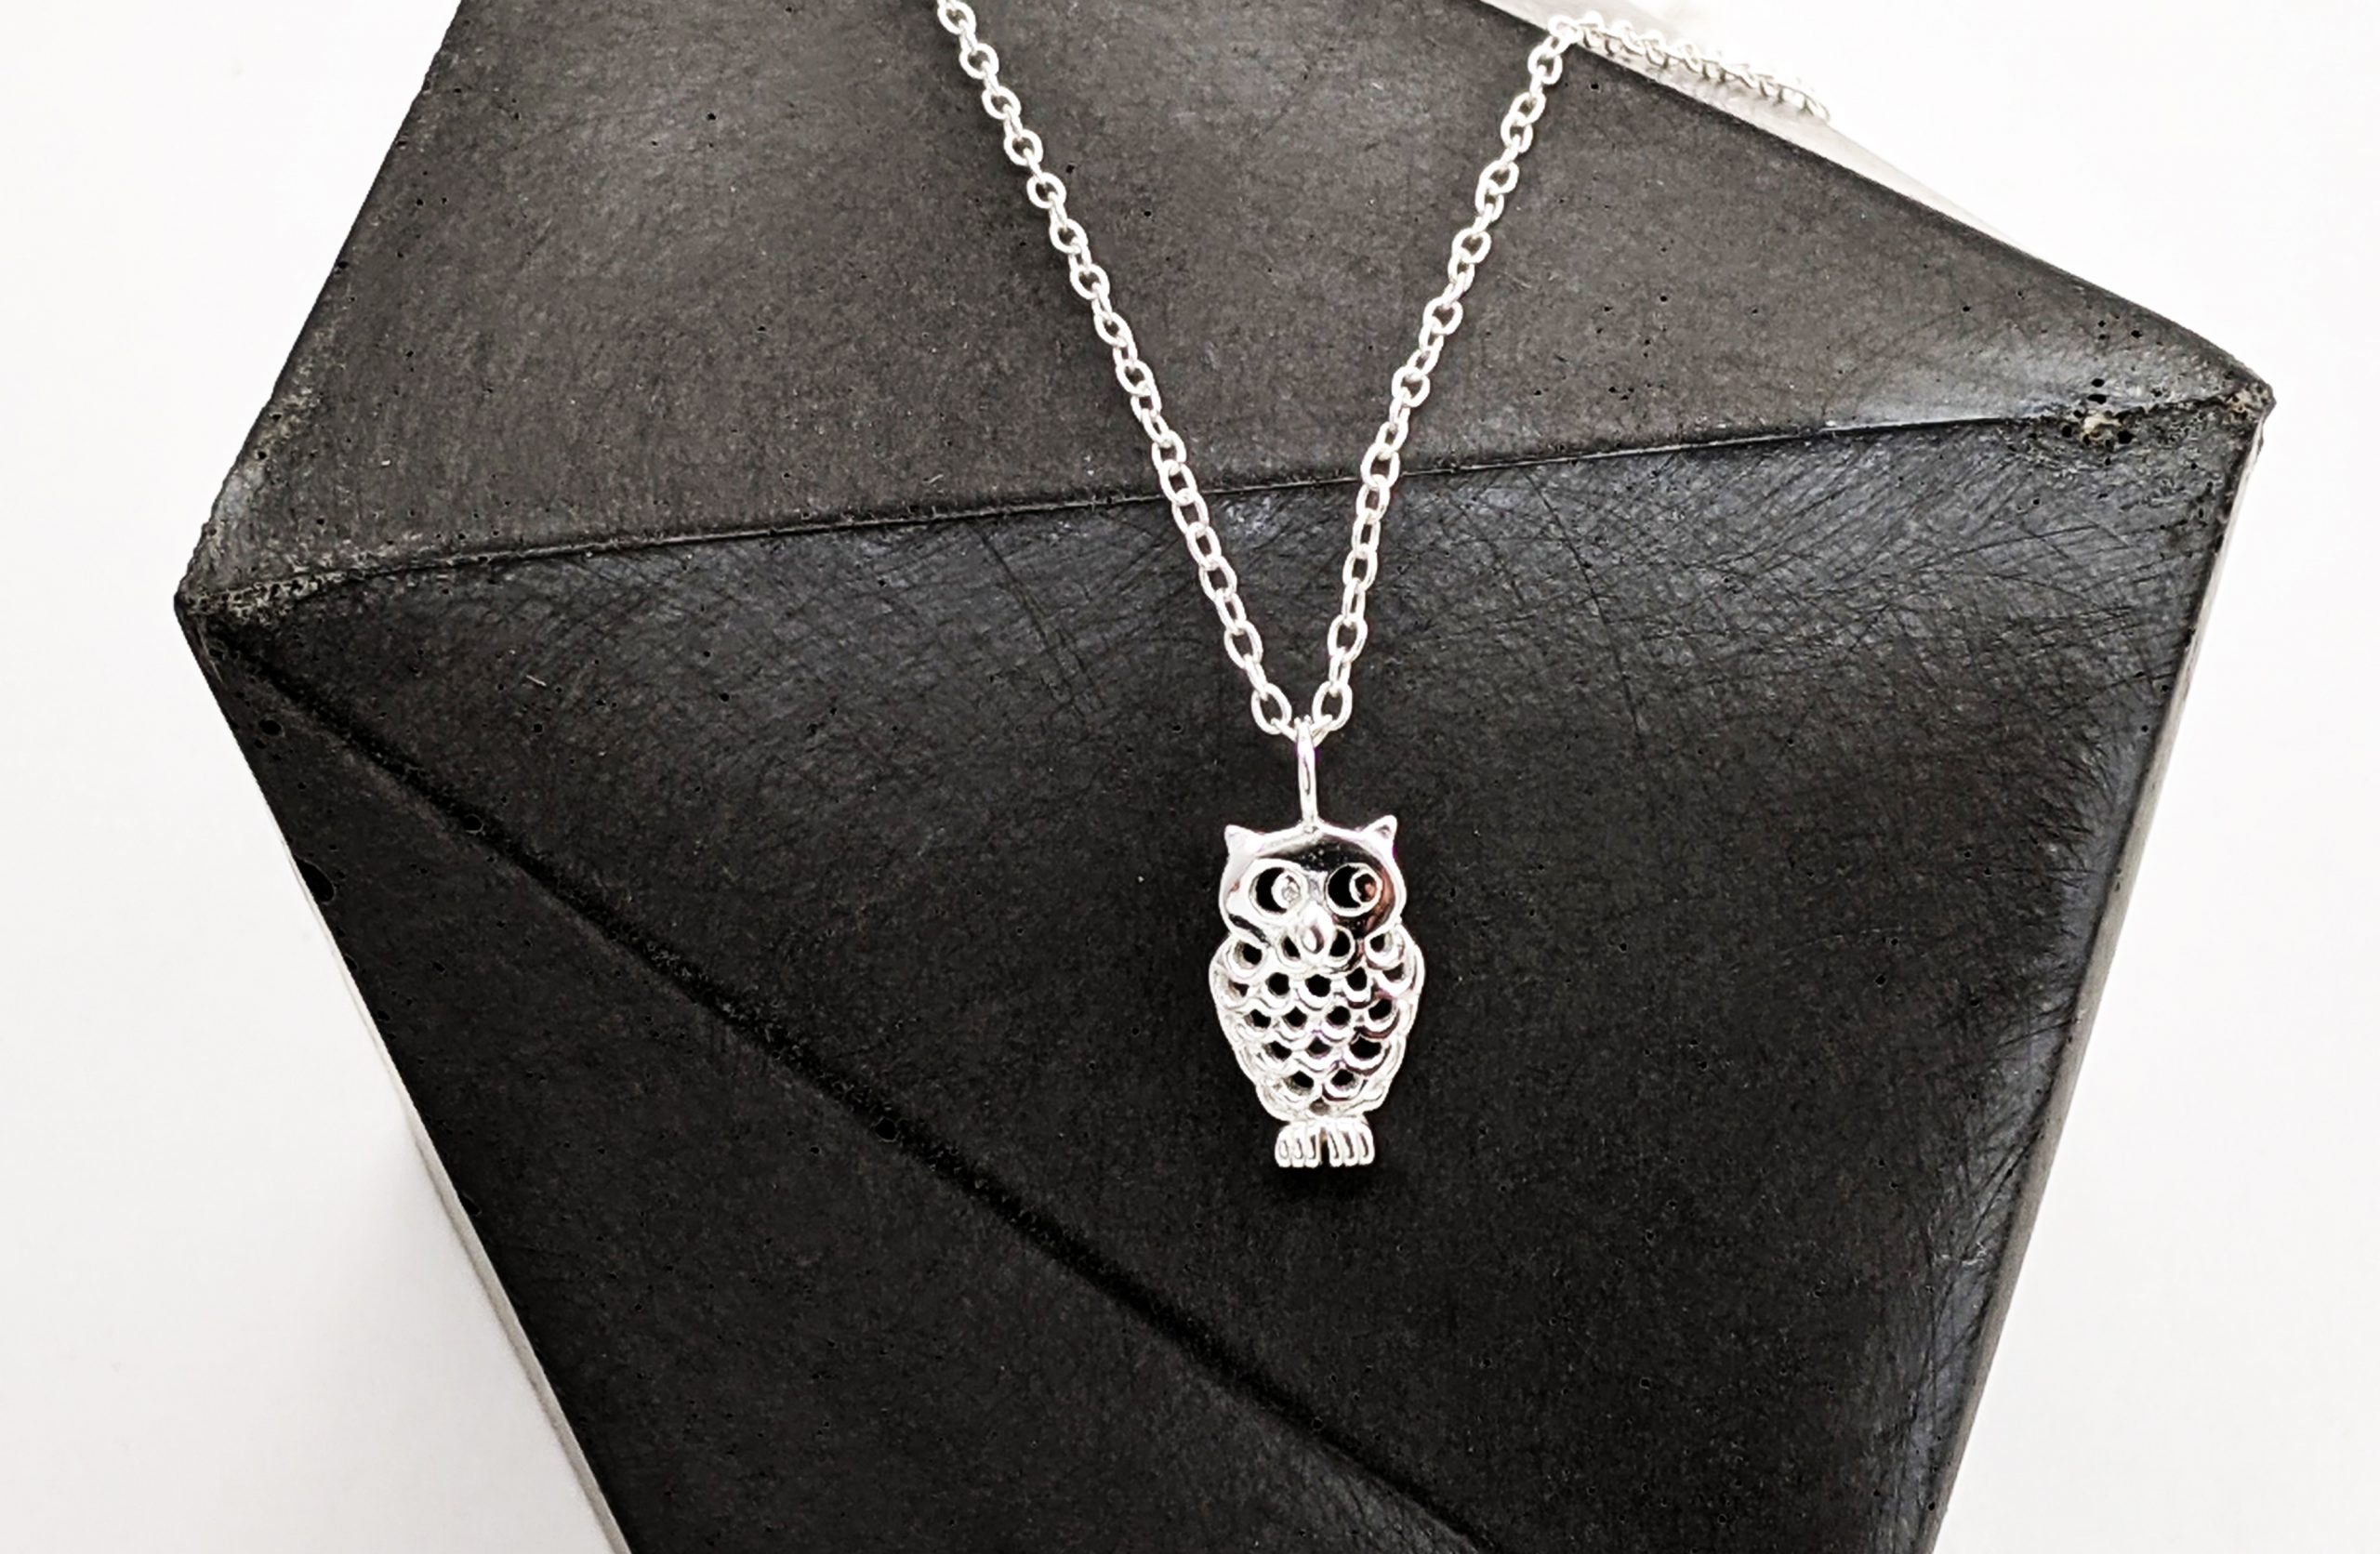 Silver Hamsa Charm Silver Necklace Sterling Silver Pendant with Solid 925 Silver Chain for Men and Women Silver Jewellery by Florin & Finch